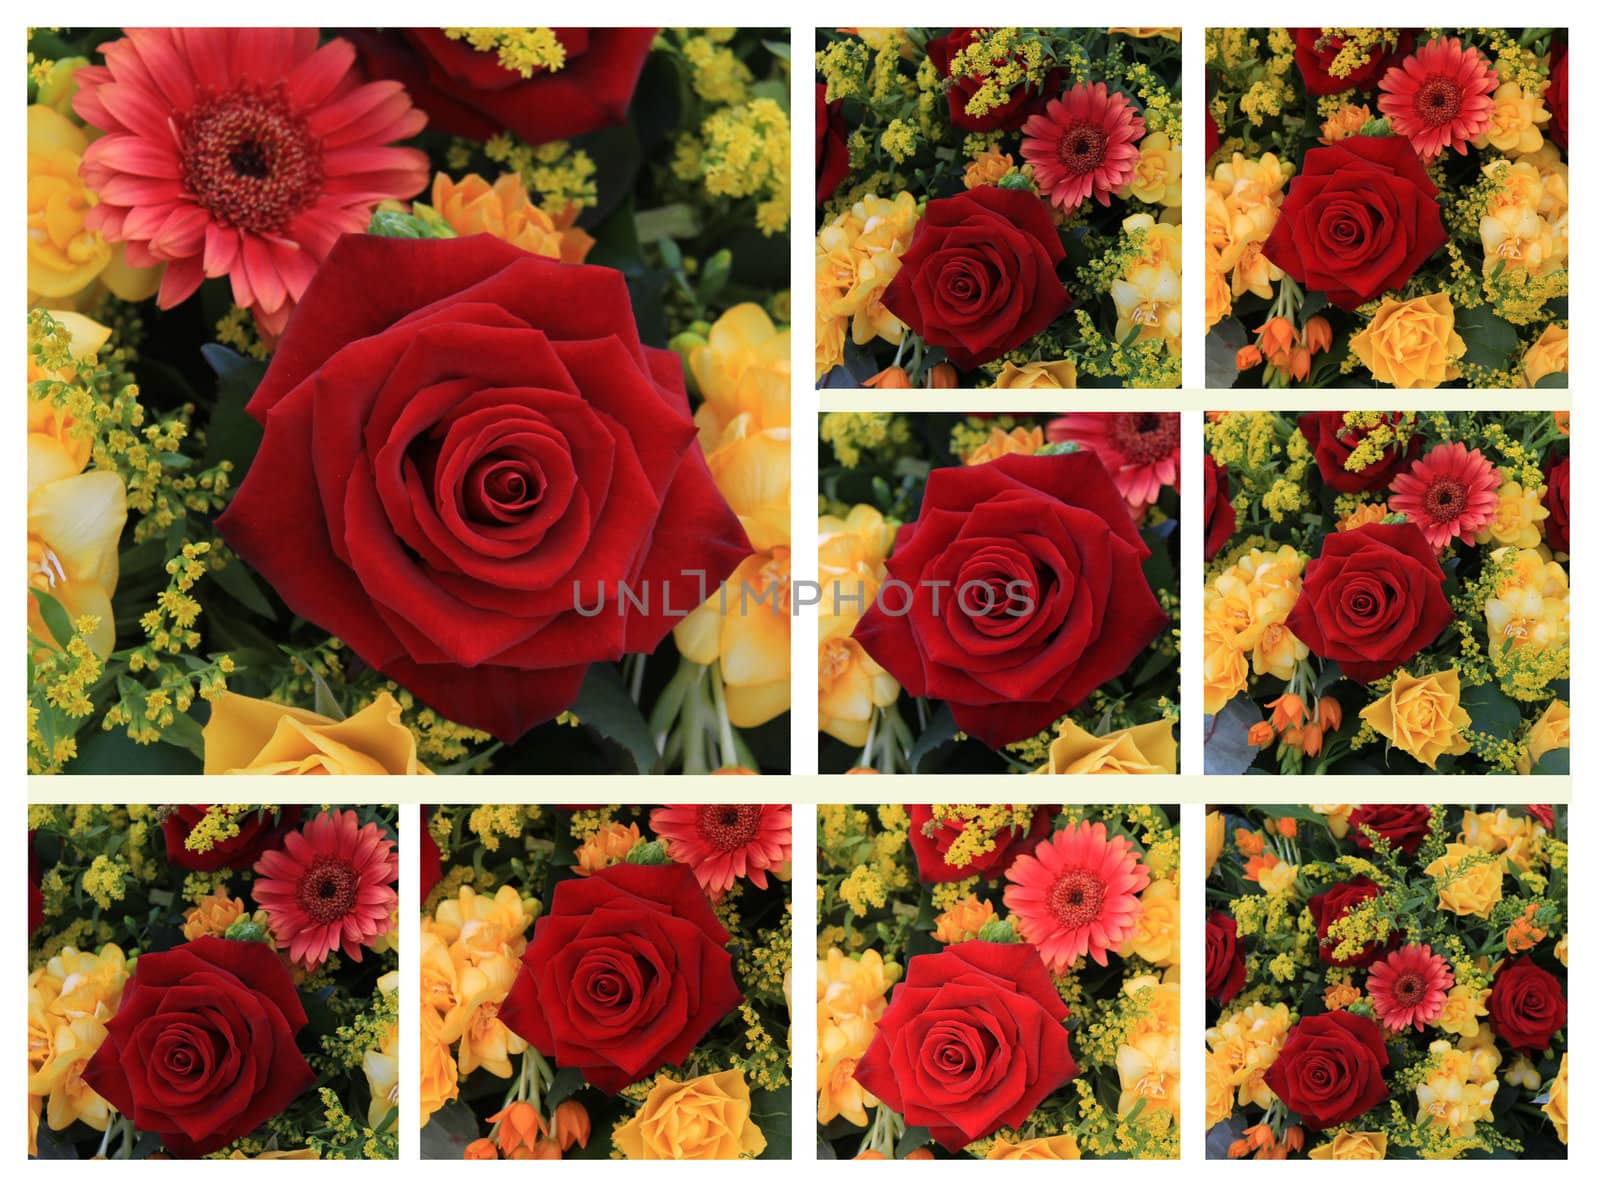 Nine different yellow and red rose images in a high resolution collage